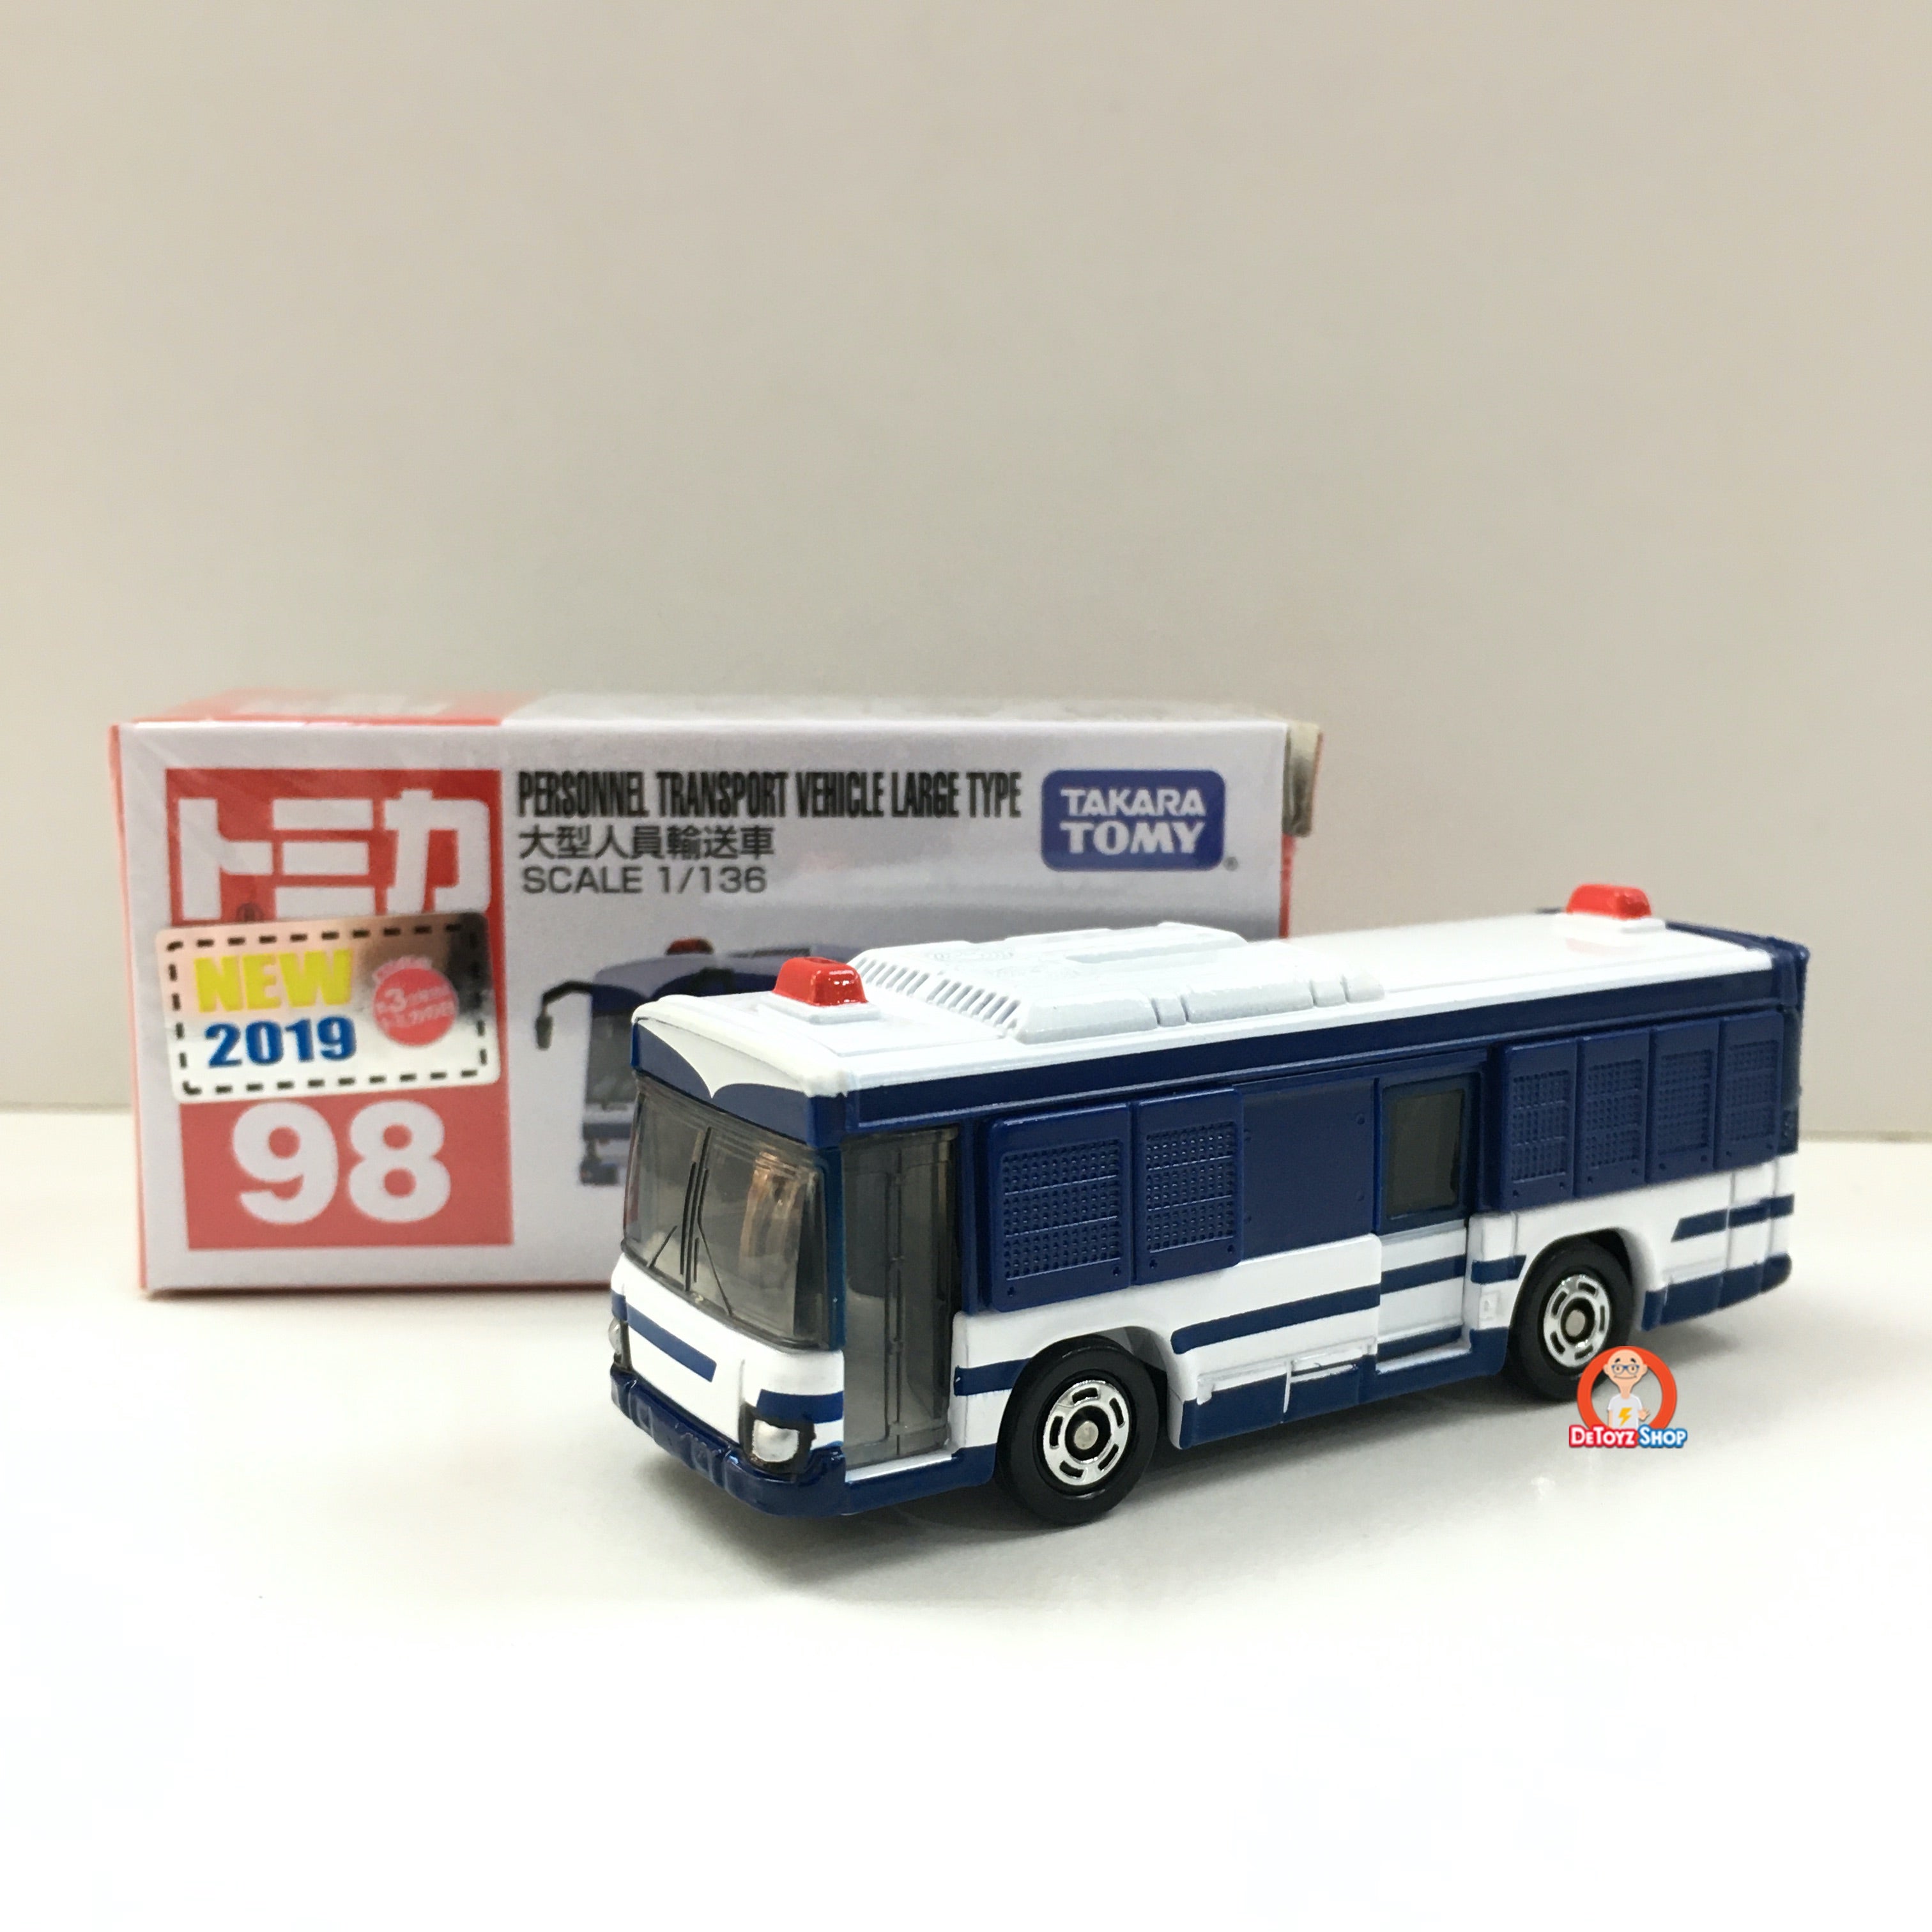 Tomica #098 Personnel Transport Vehicle Large Type